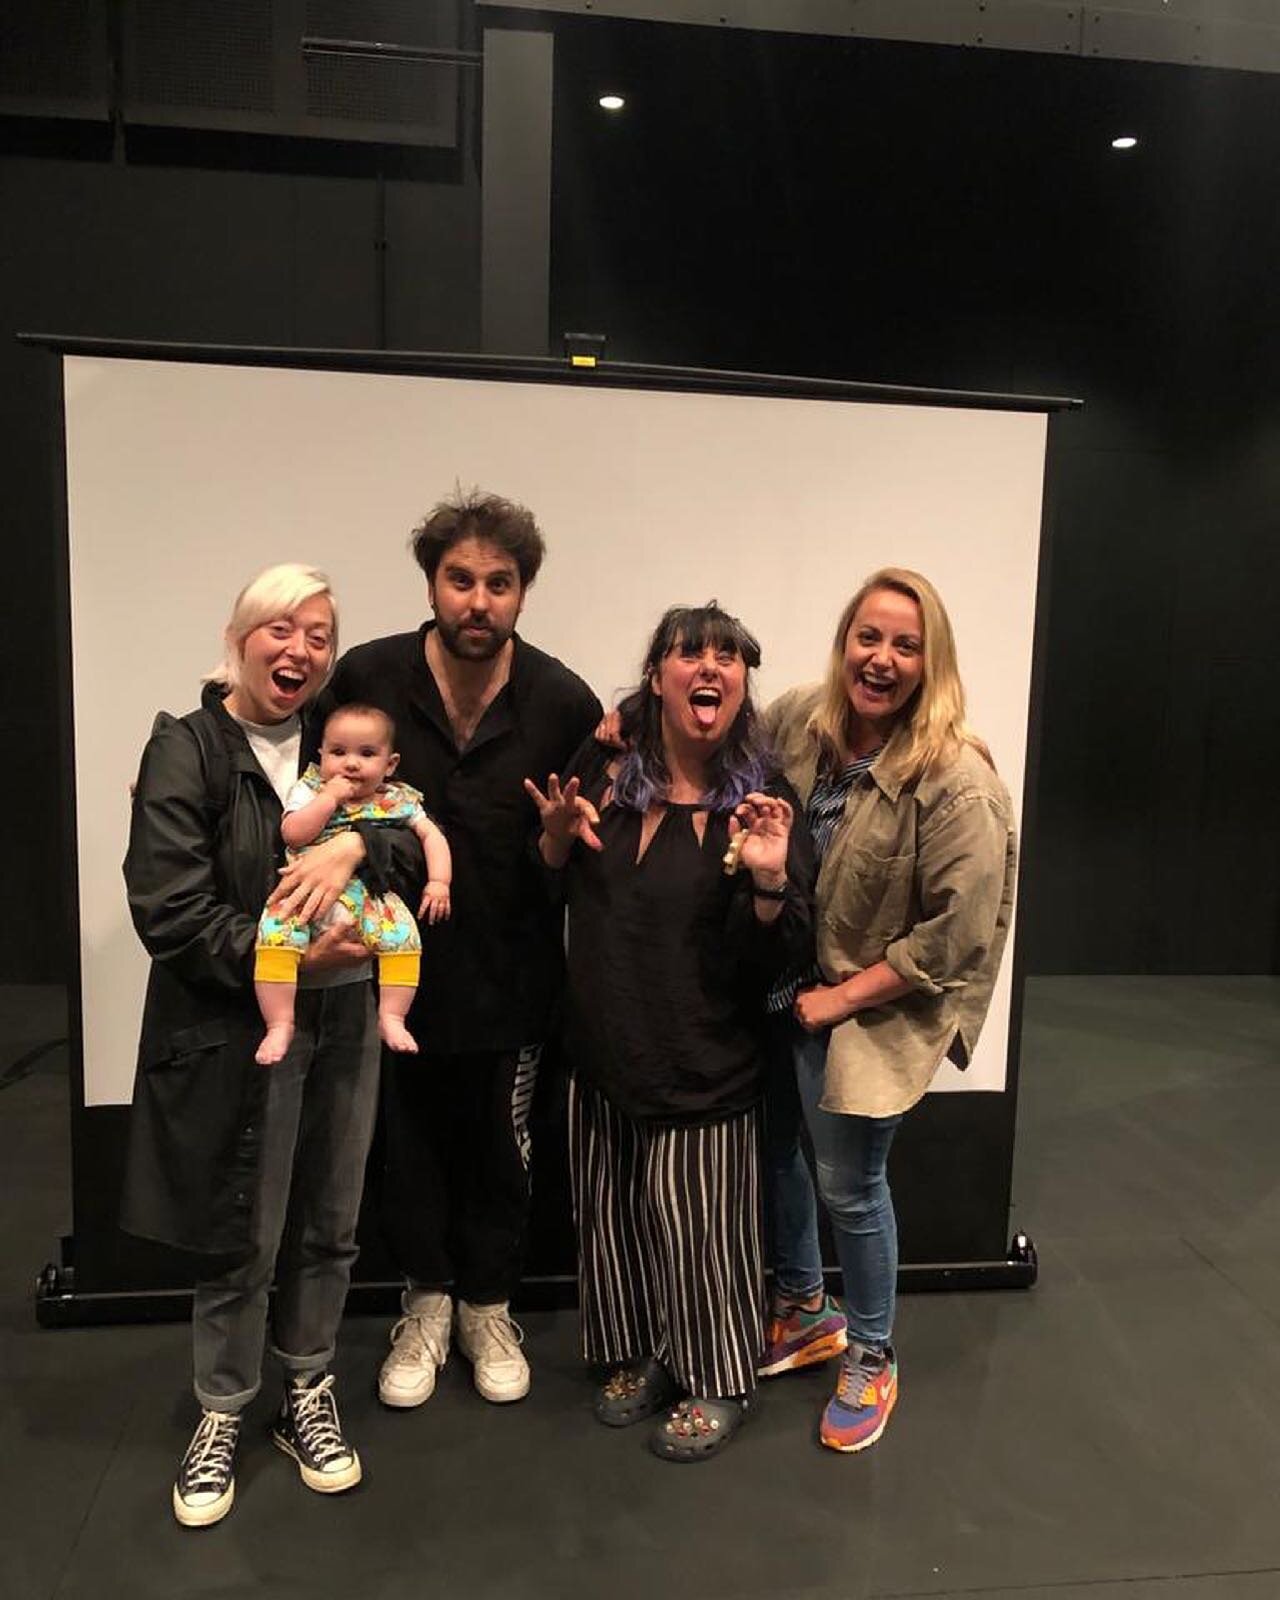 So thrilled to be working with this beautiful lot @marlowetheatre 
@brigitteaphrodite @lucythackeray @keefelaura @neelam_the_poet and @lathamvoutsa 
Baby Sappho had the best time too ❤️